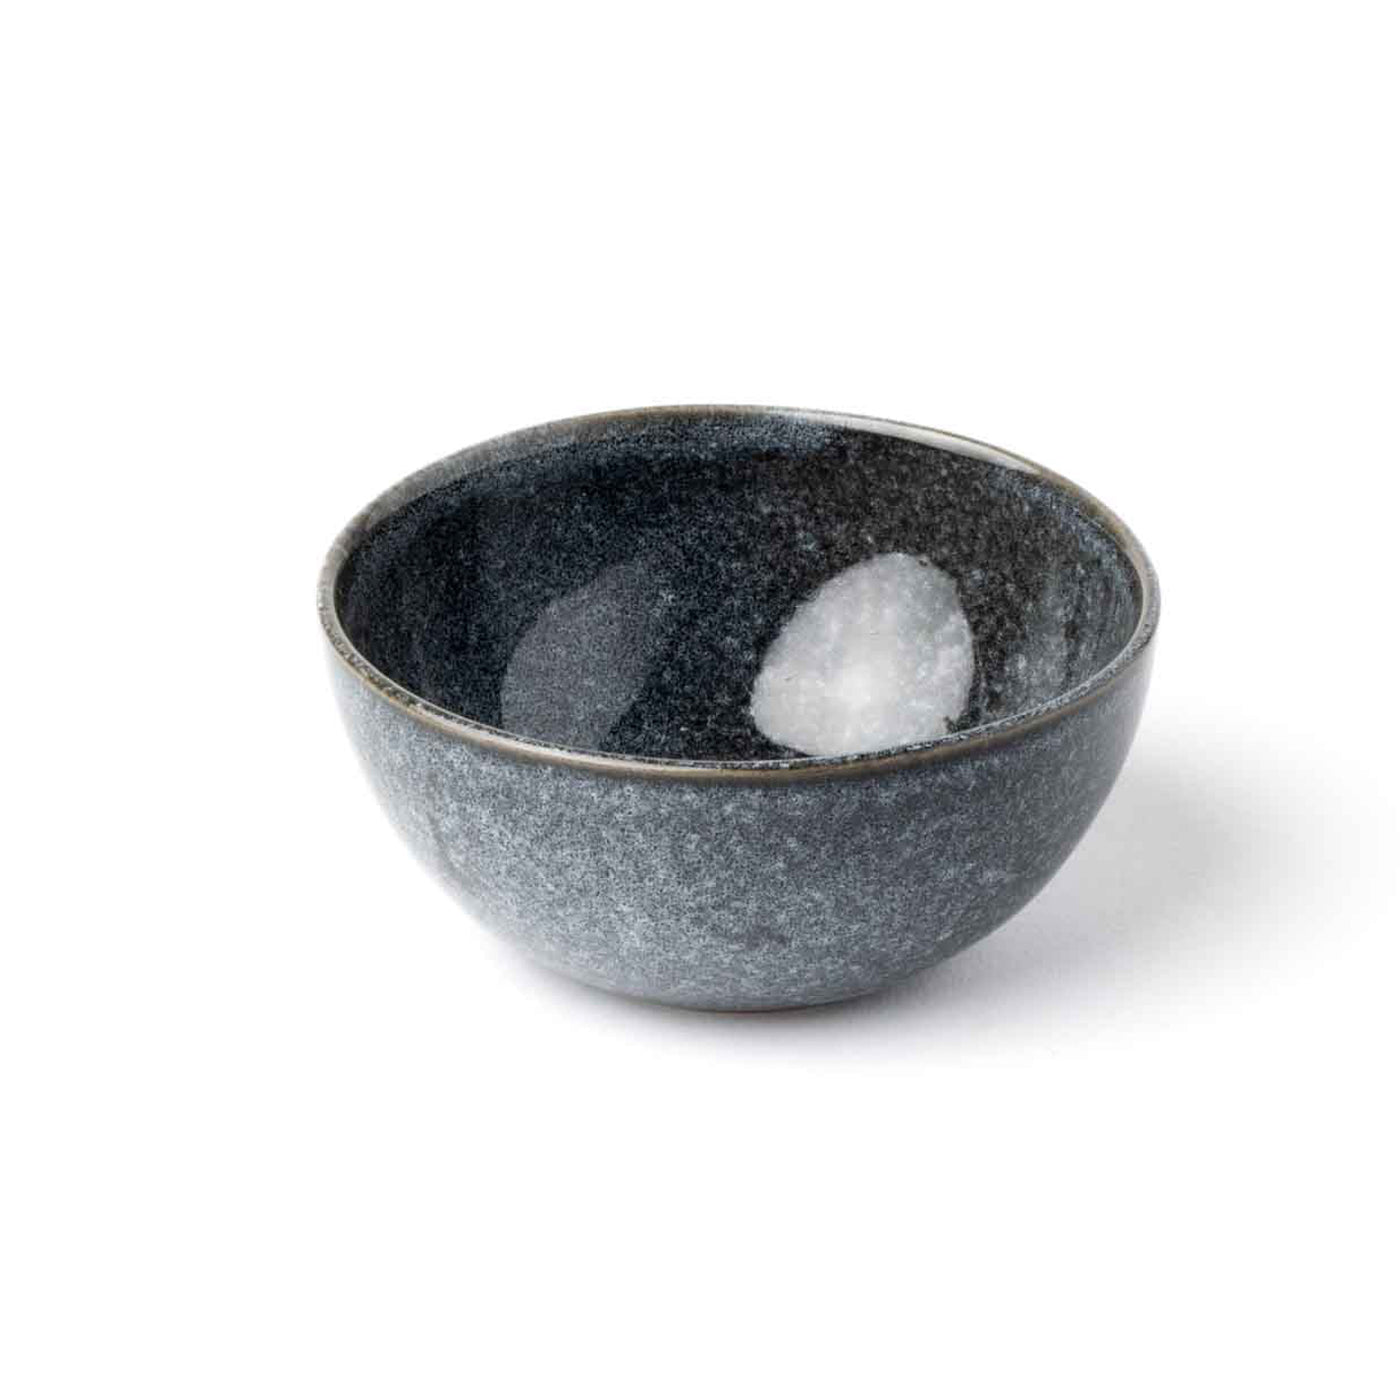 Small dip bowl for sauces Snack Bowl in reactive blue glaze Handmade in Portugal